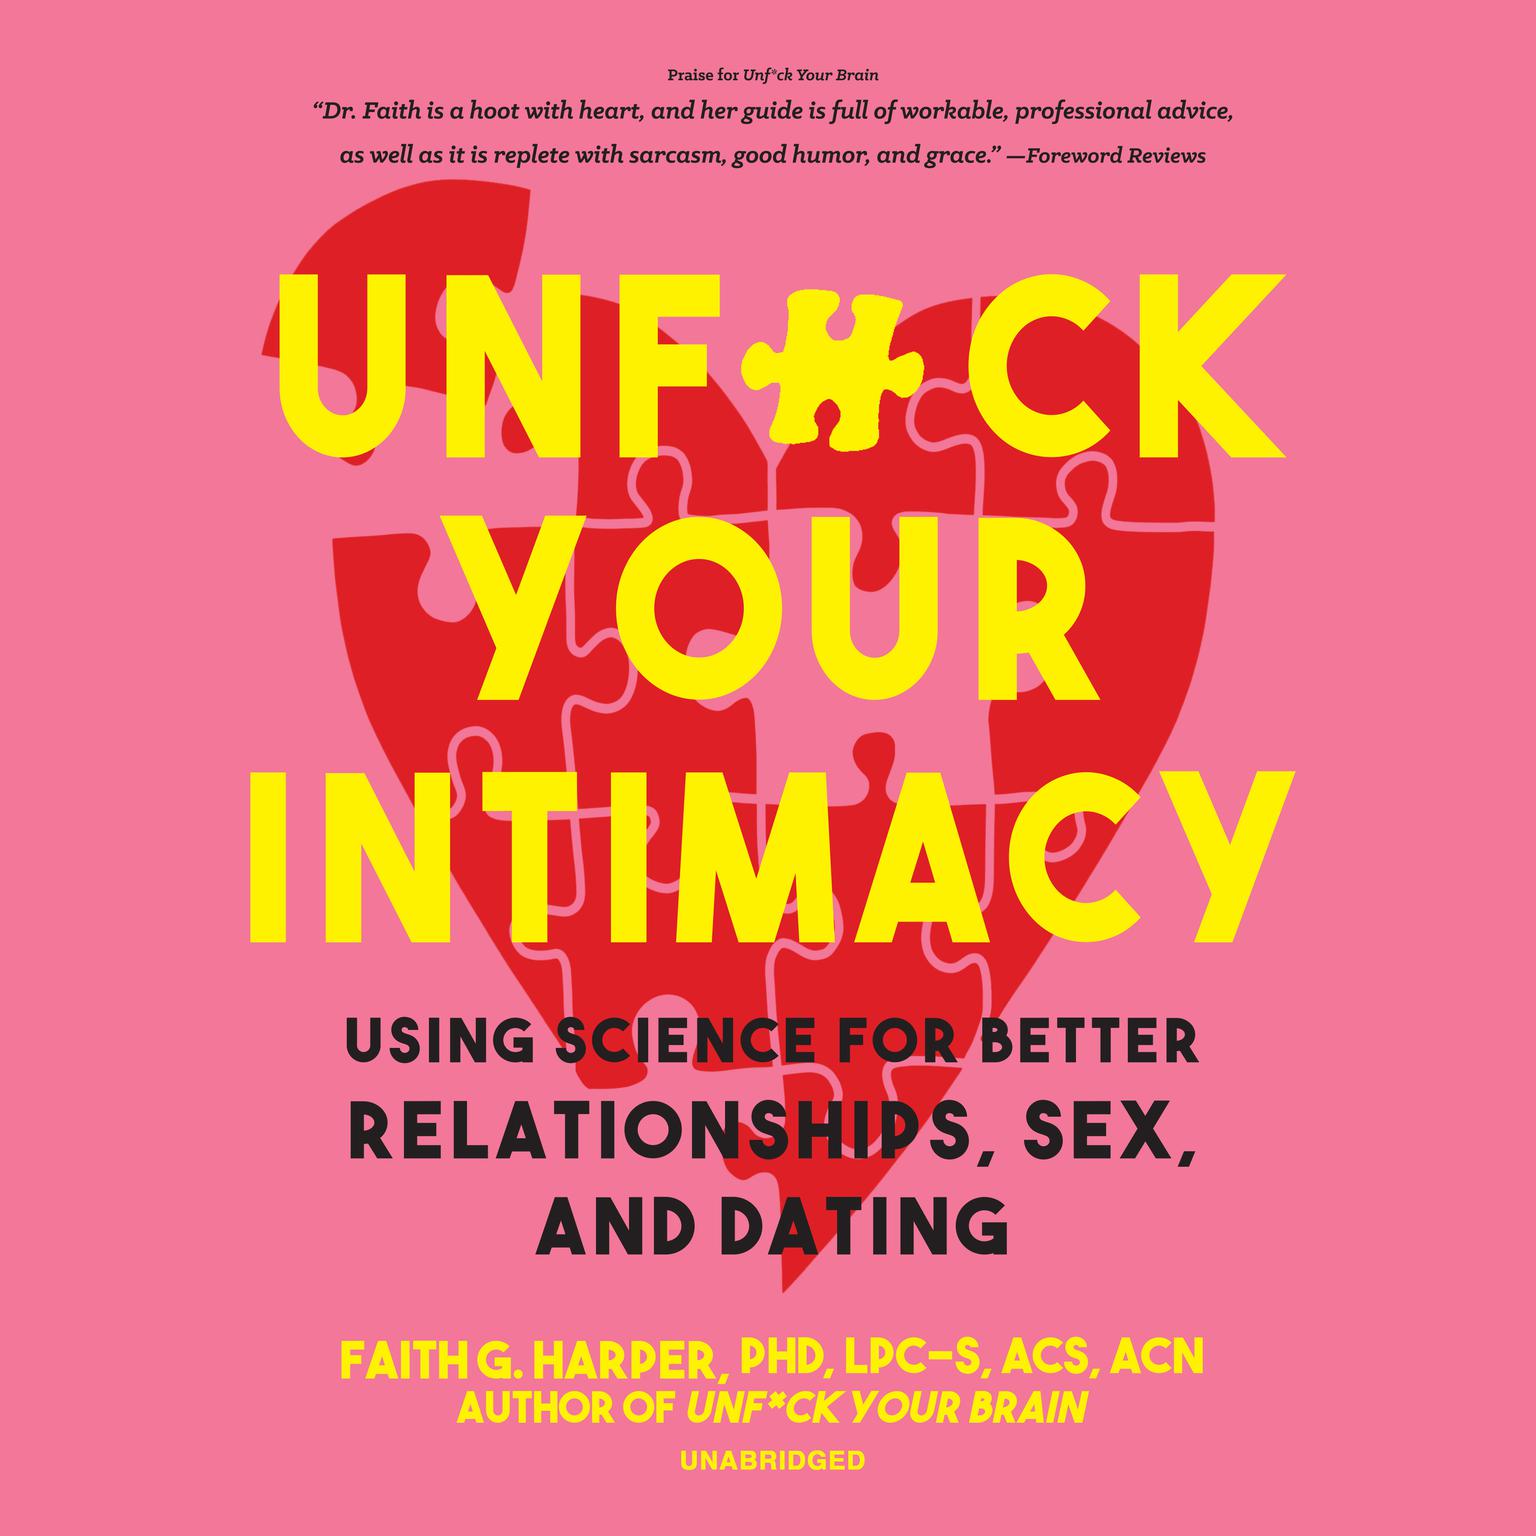 Unf*ck Your Intimacy: Using Science for Better Relationships, Sex, and Dating Audiobook, by Faith G. Harper